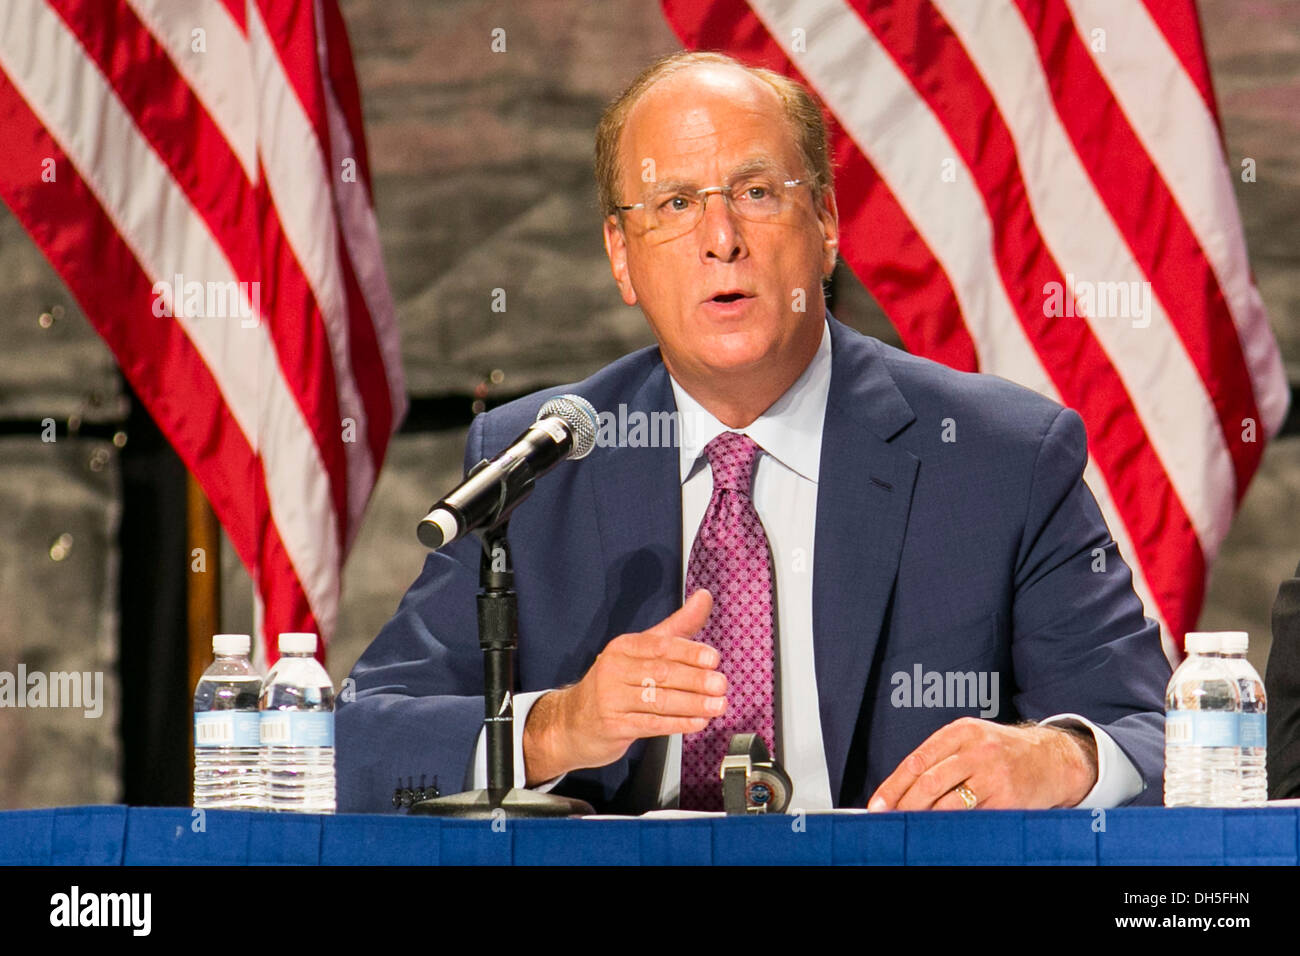 Laurence 'Larry' Fink, Chairman and CEO of BlackRock, Inc. Stock Photo